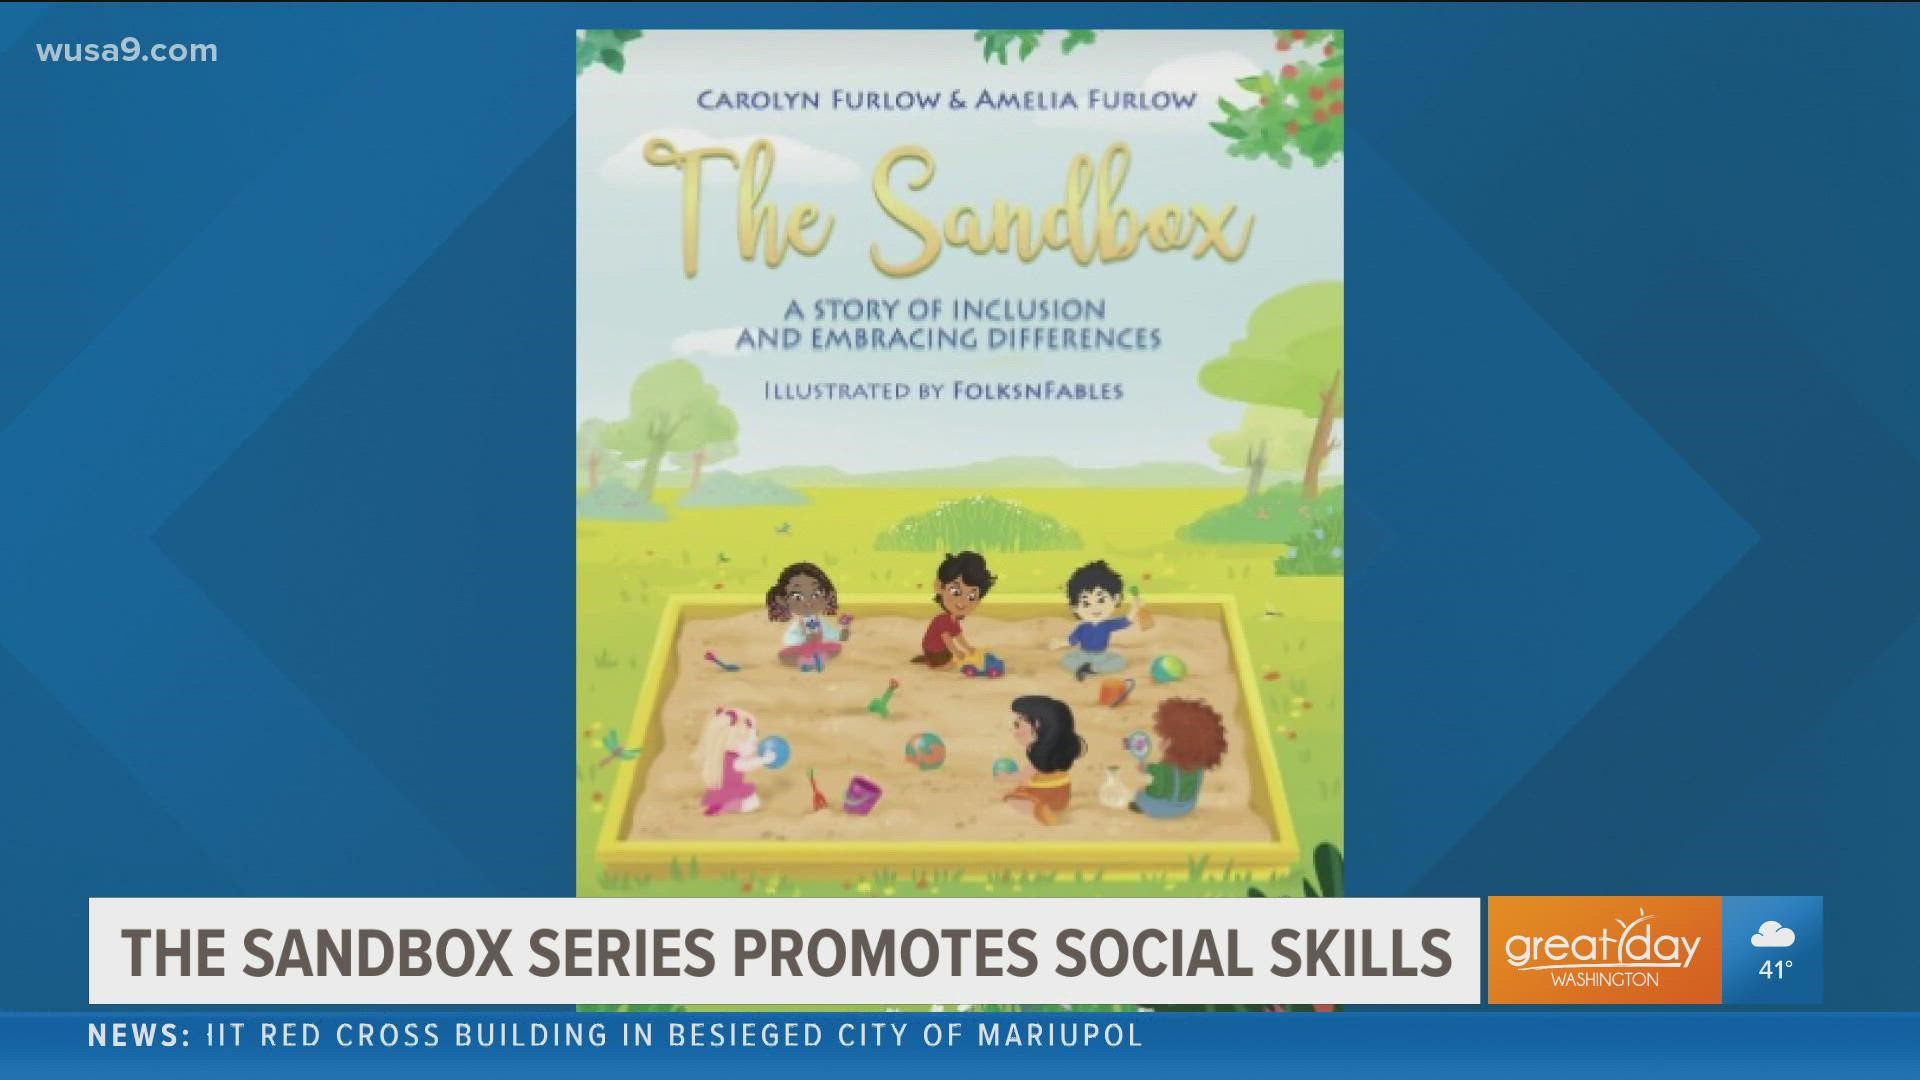 Mom and daughter team Carolyn and Amelia Furlow created a series of children's books called The Sandbox to help promote diversity and inclusion.